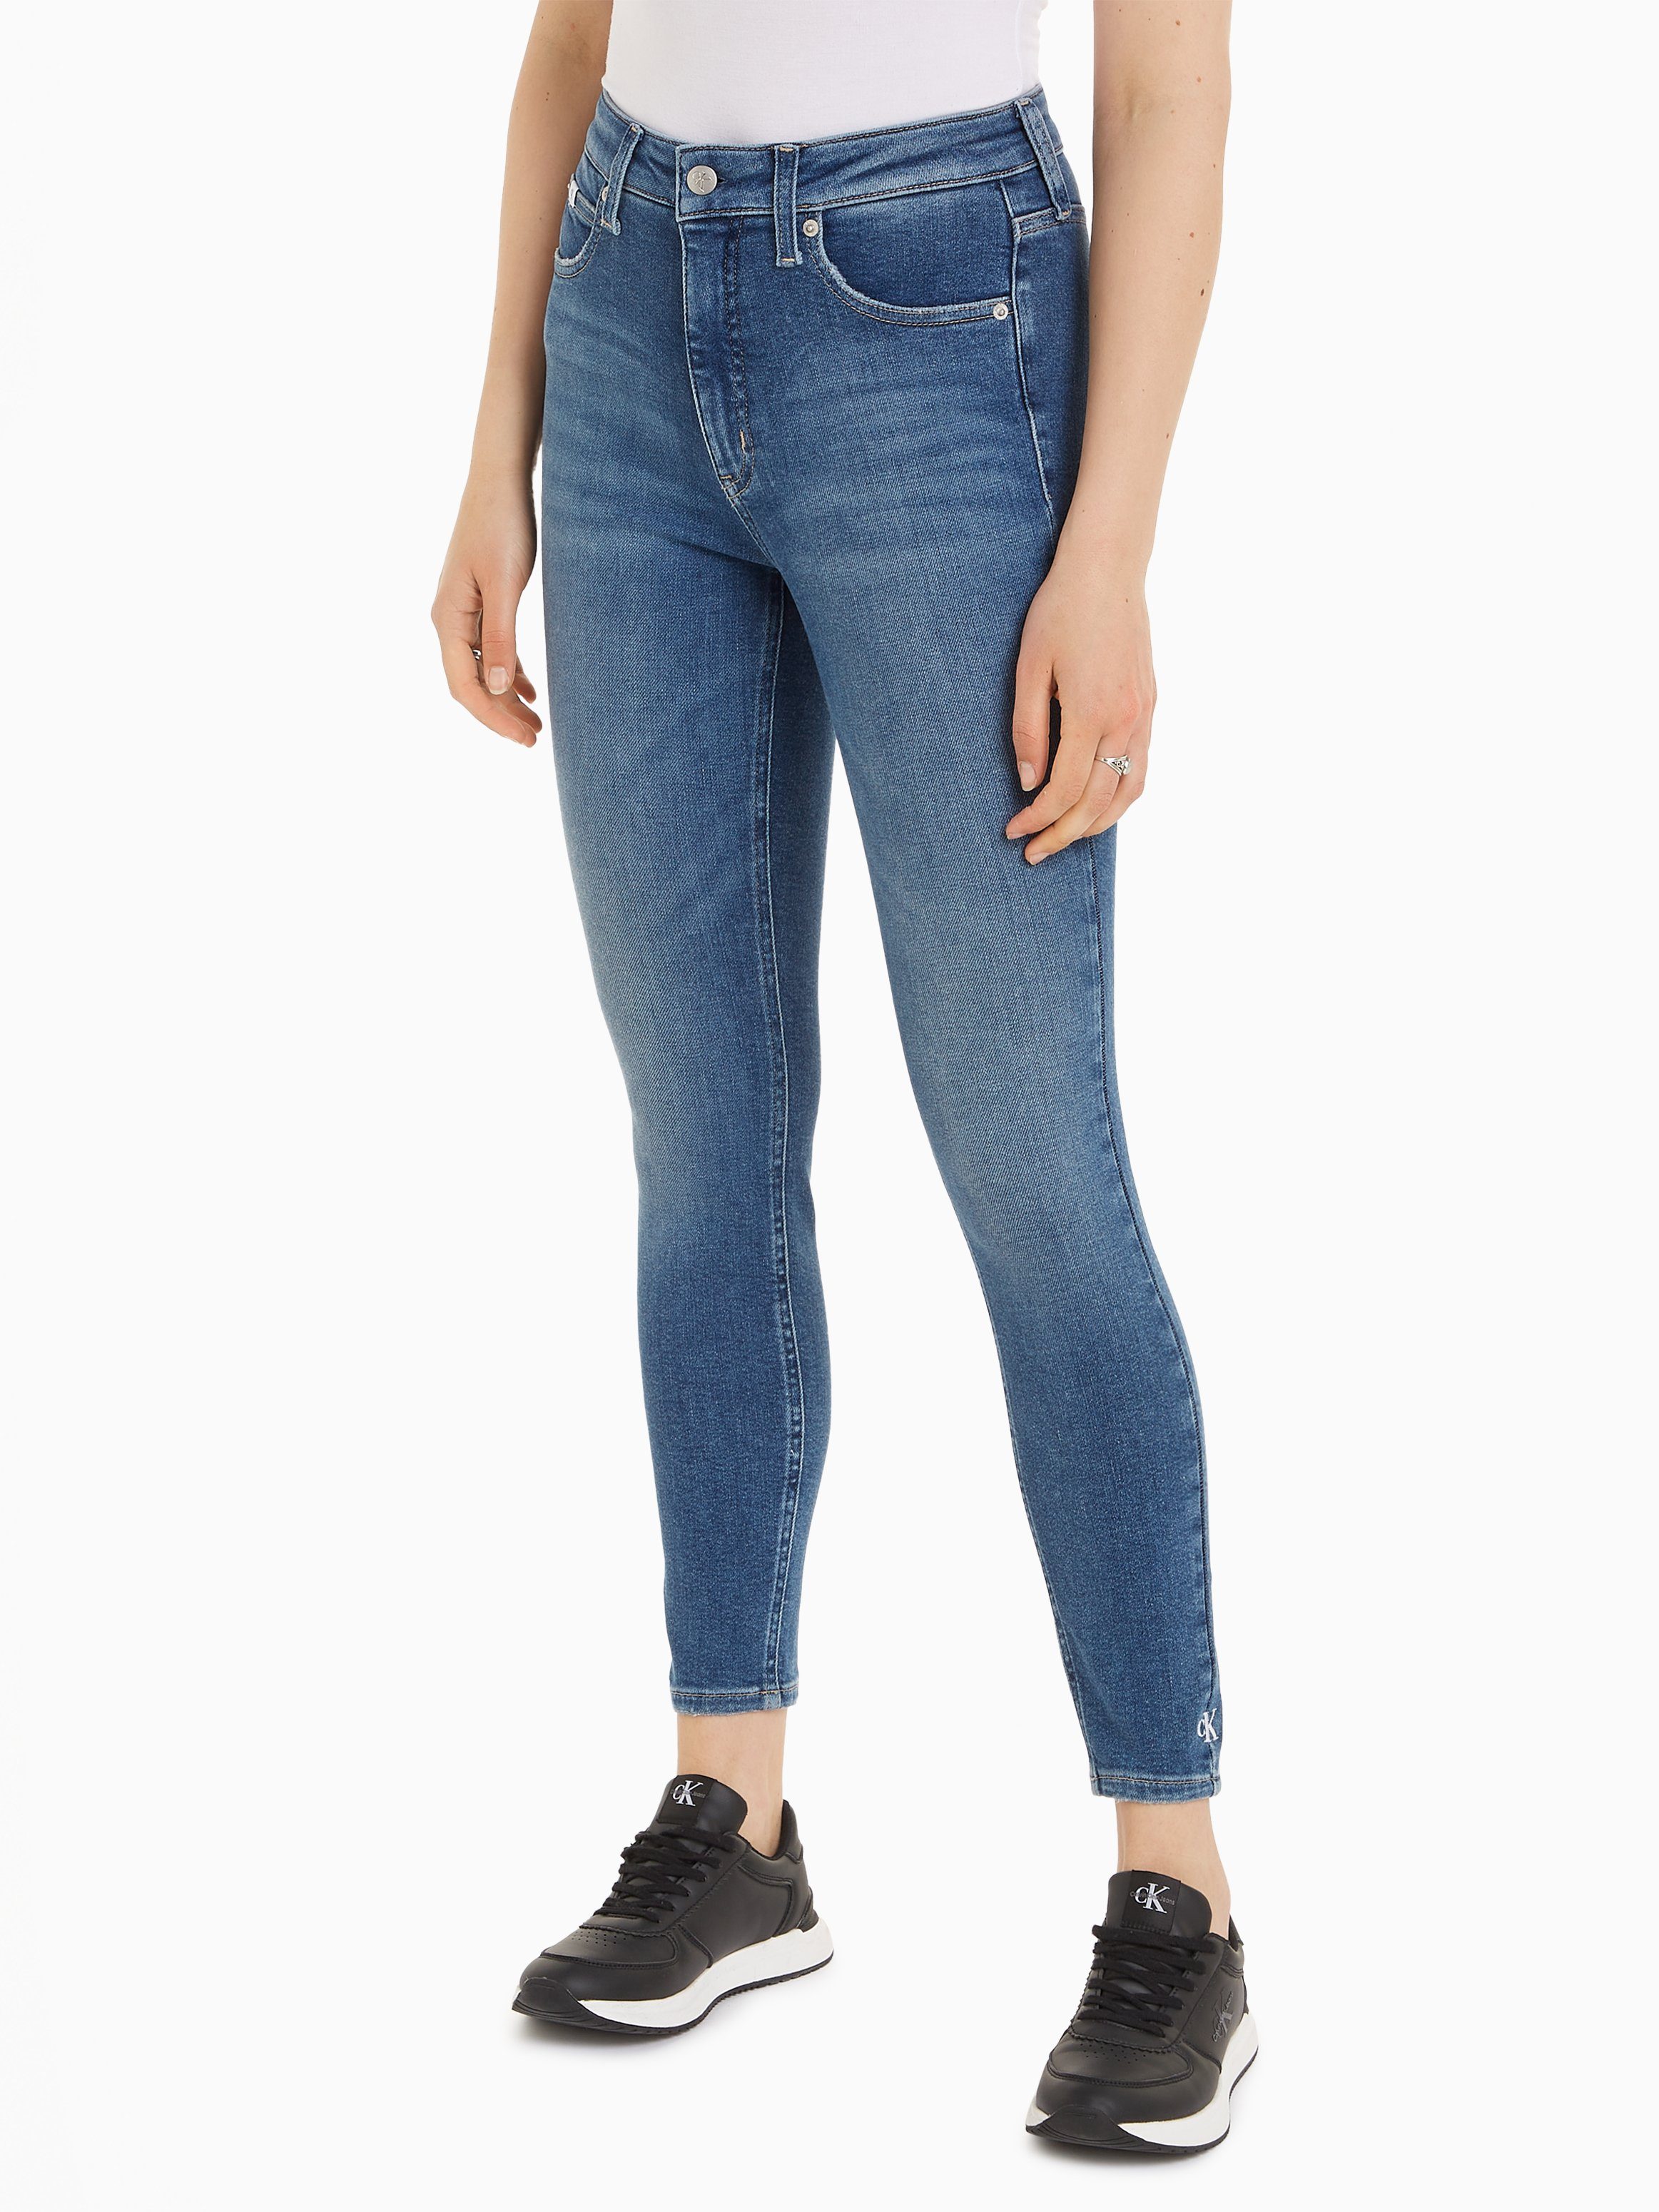 ANKLE SUPER HIGH RISE Jeans SKINNY Ankle-Jeans Calvin Klein